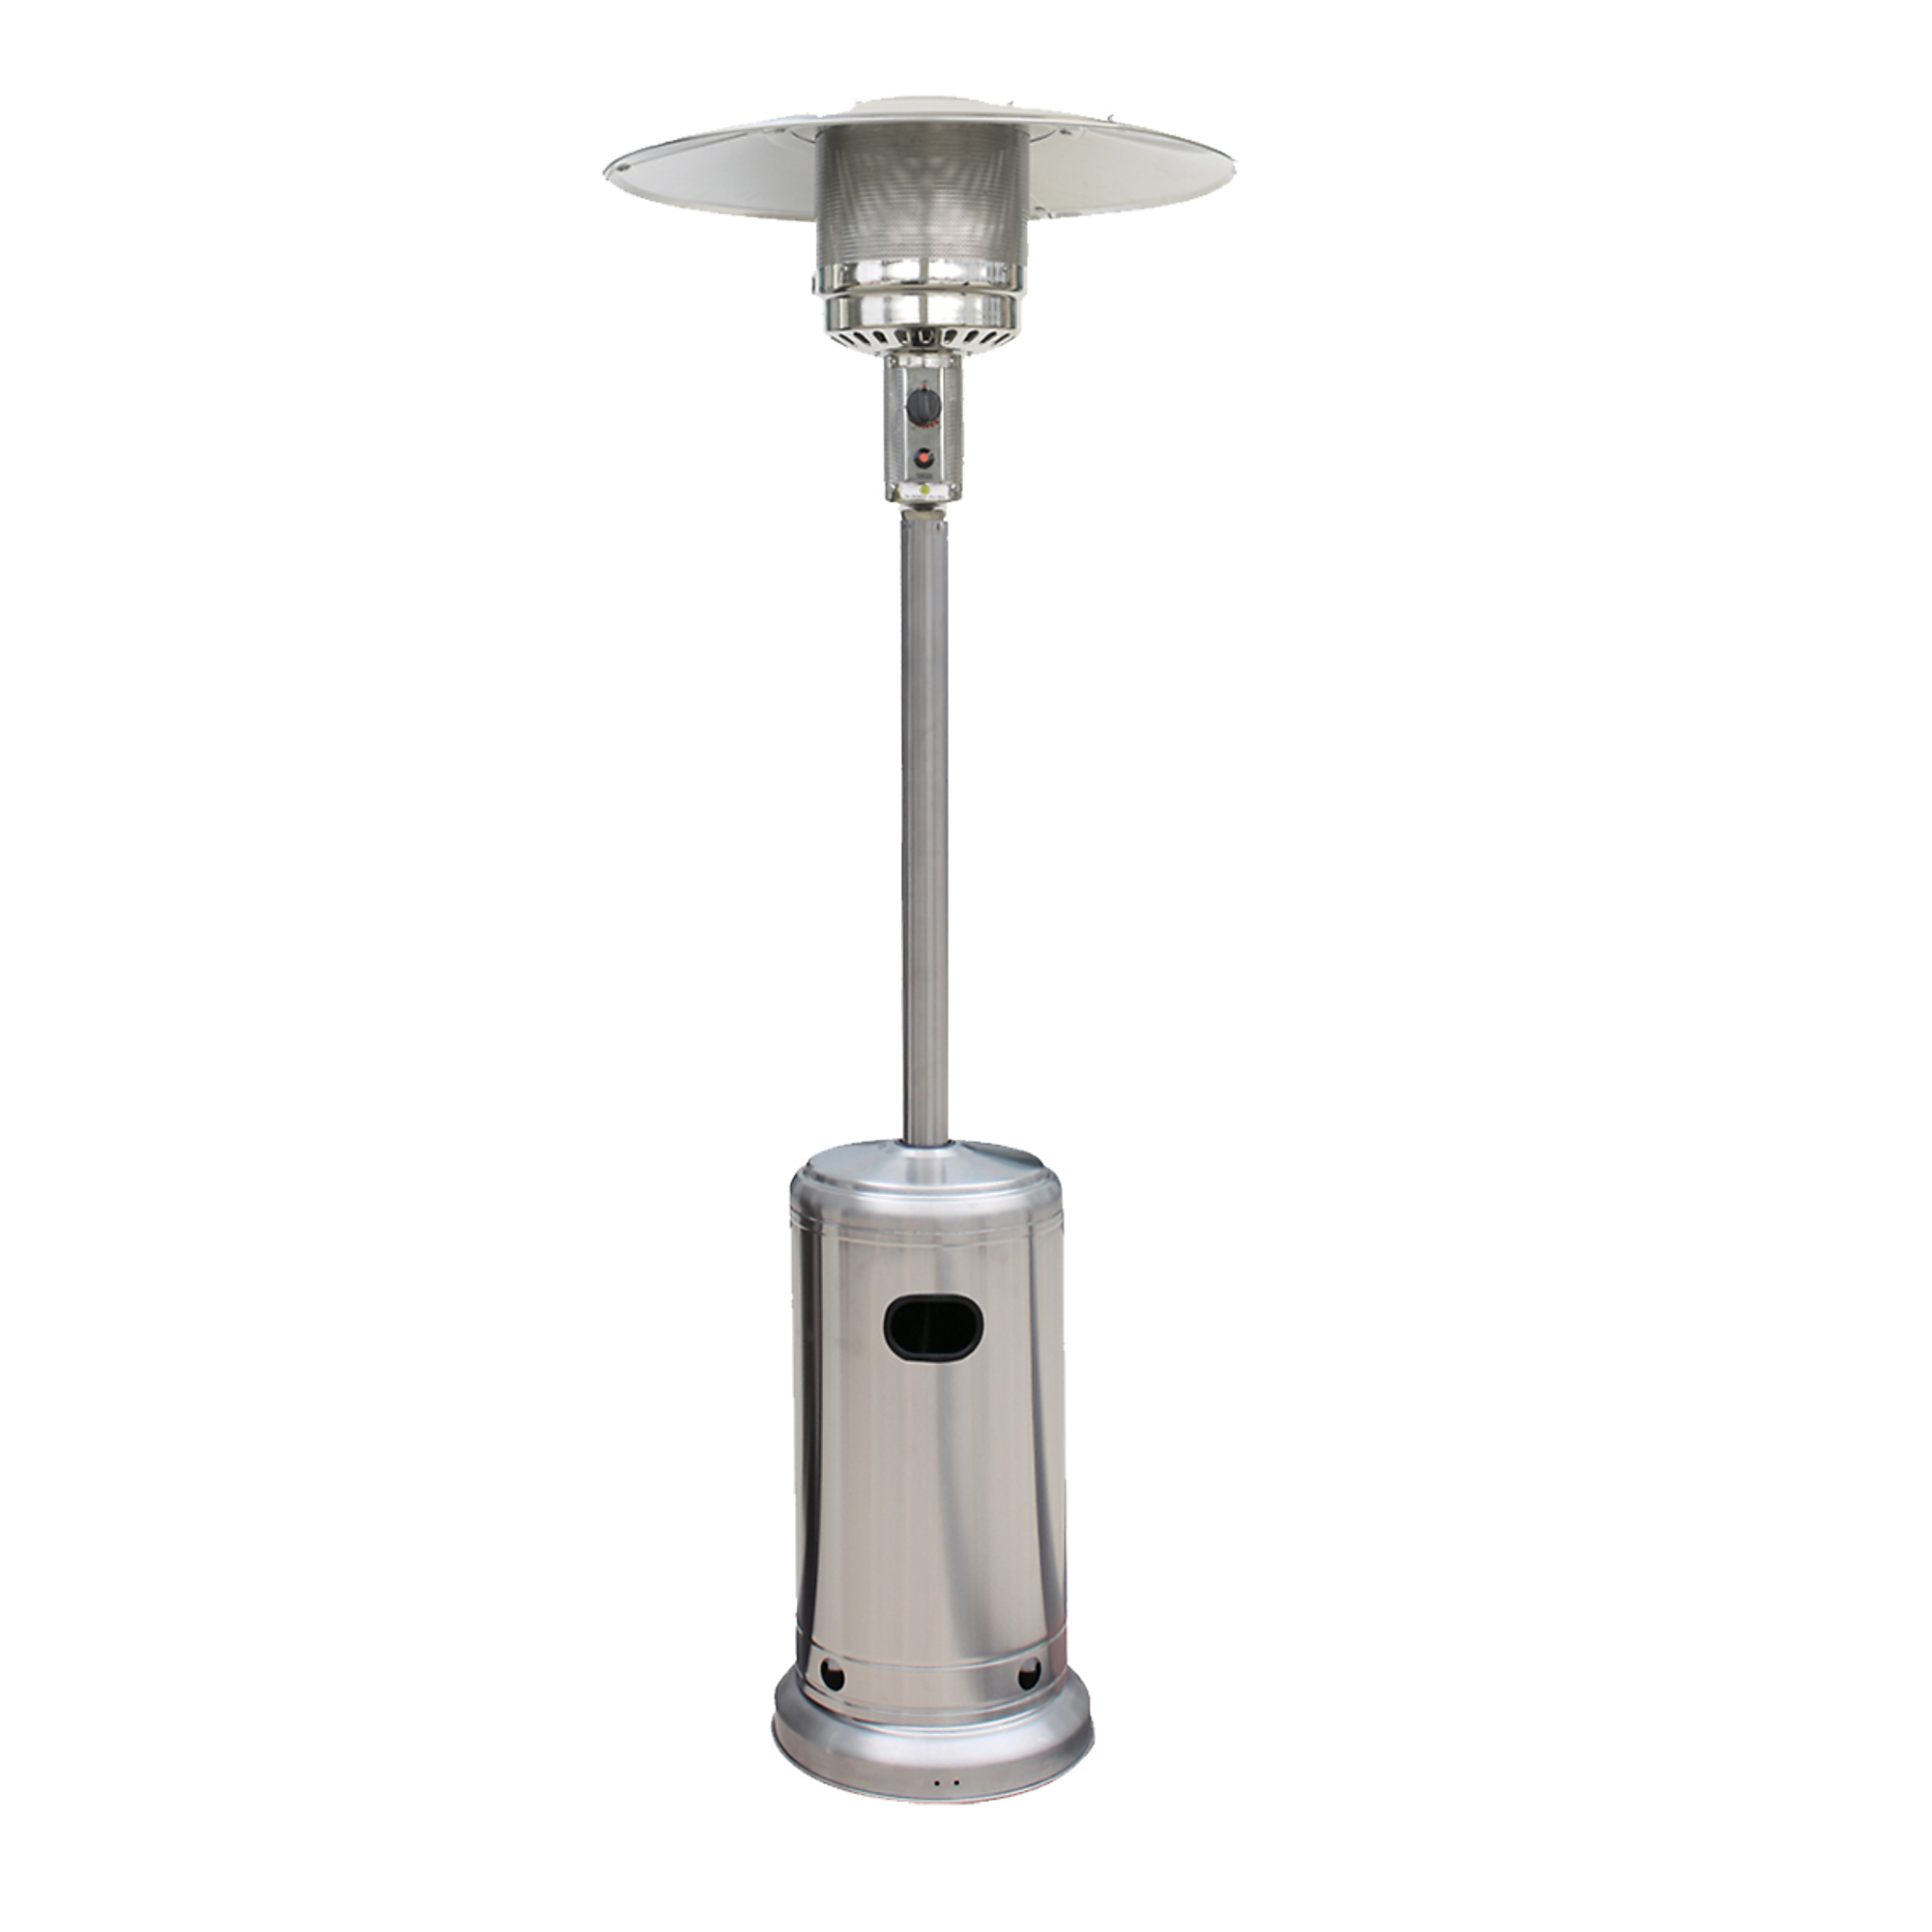 Blue Sky, Stainless Steel Patio Heater, Fuel Type Propane, Diameter 36 in, Material Carbon Steel, Model PHG8732SS